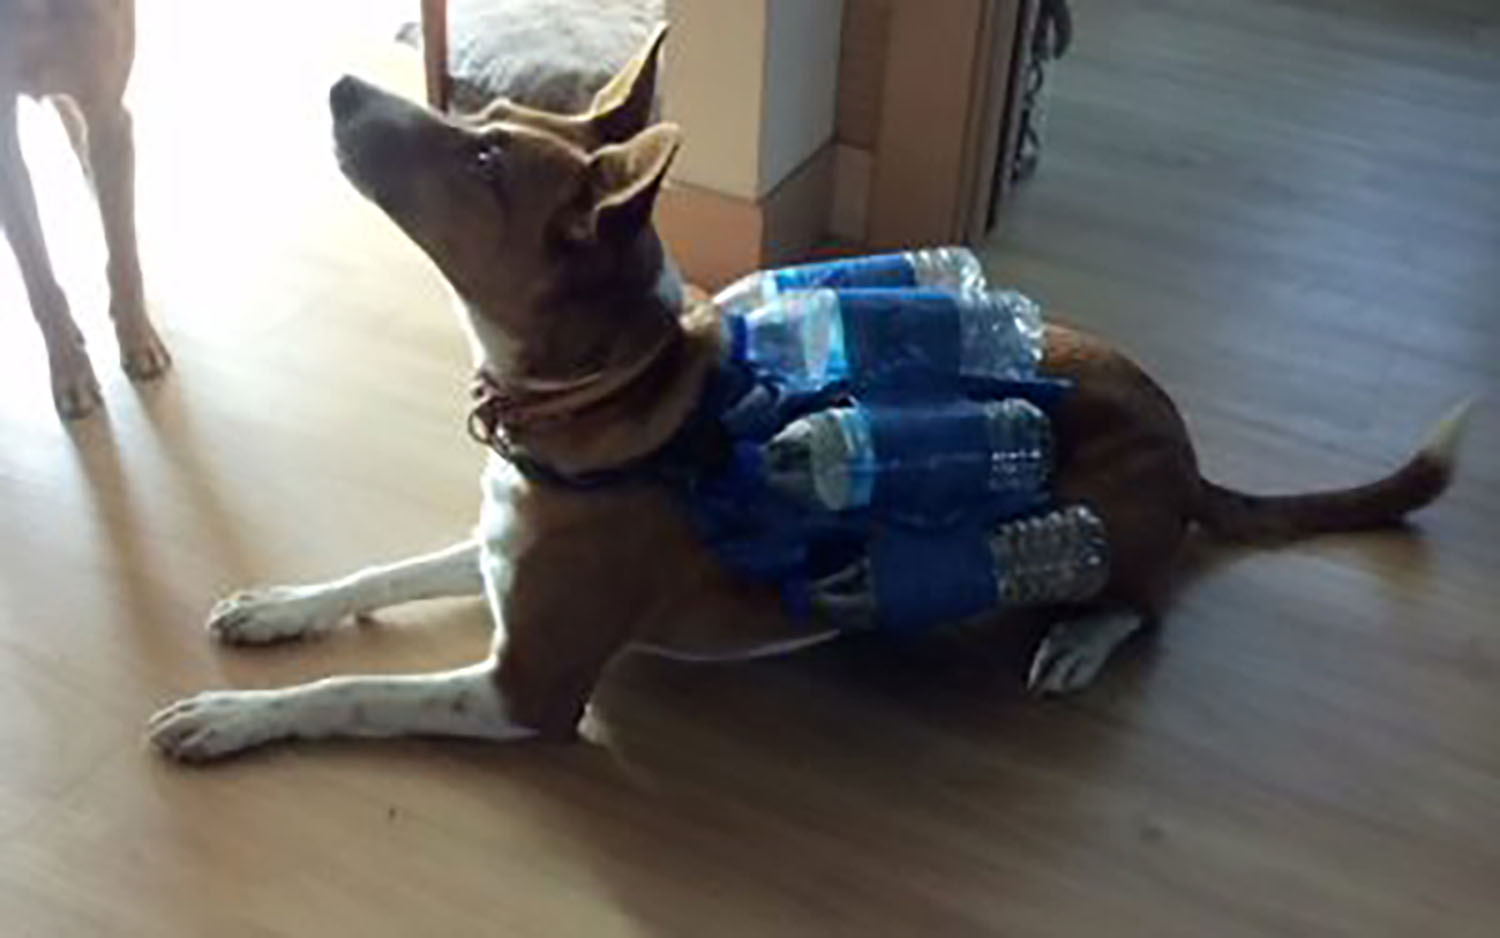 Life jacket for dogs